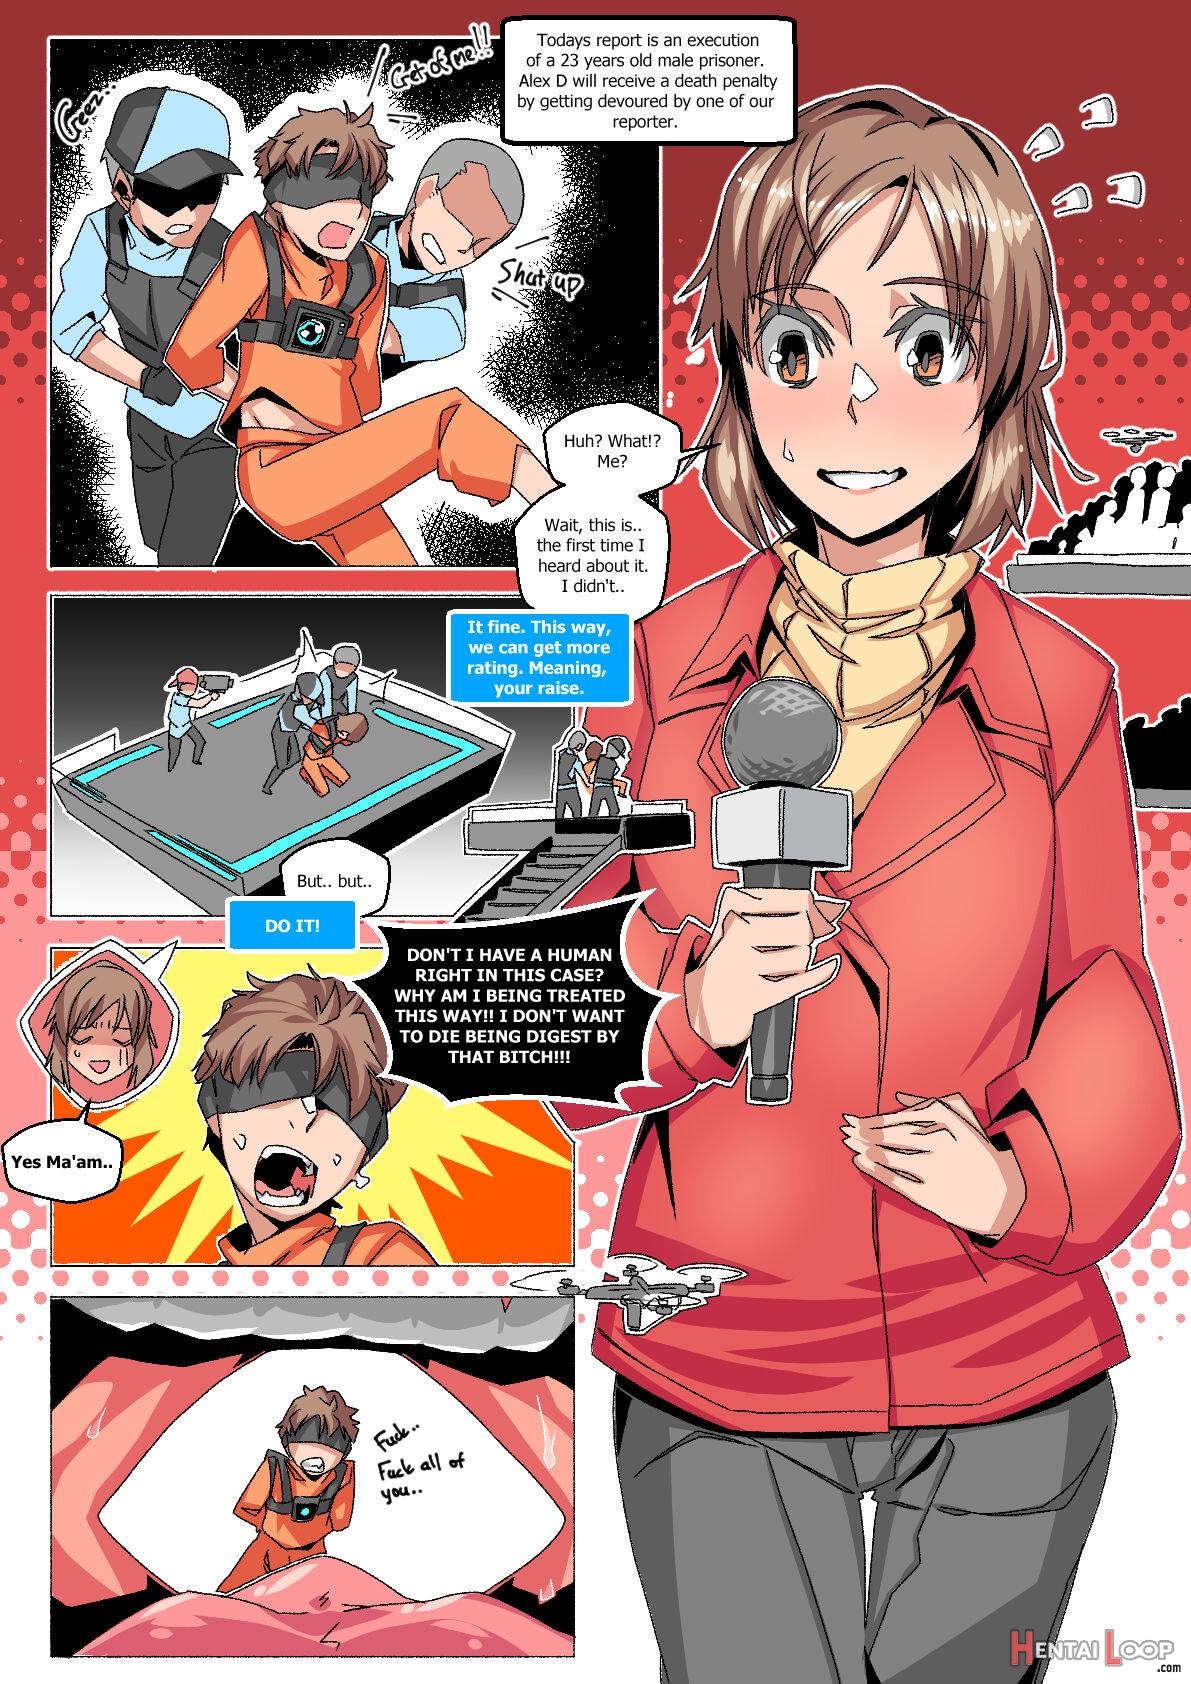 Read Journalist Information (by Luckyb) - Hentai doujinshi for free at  HentaiLoop